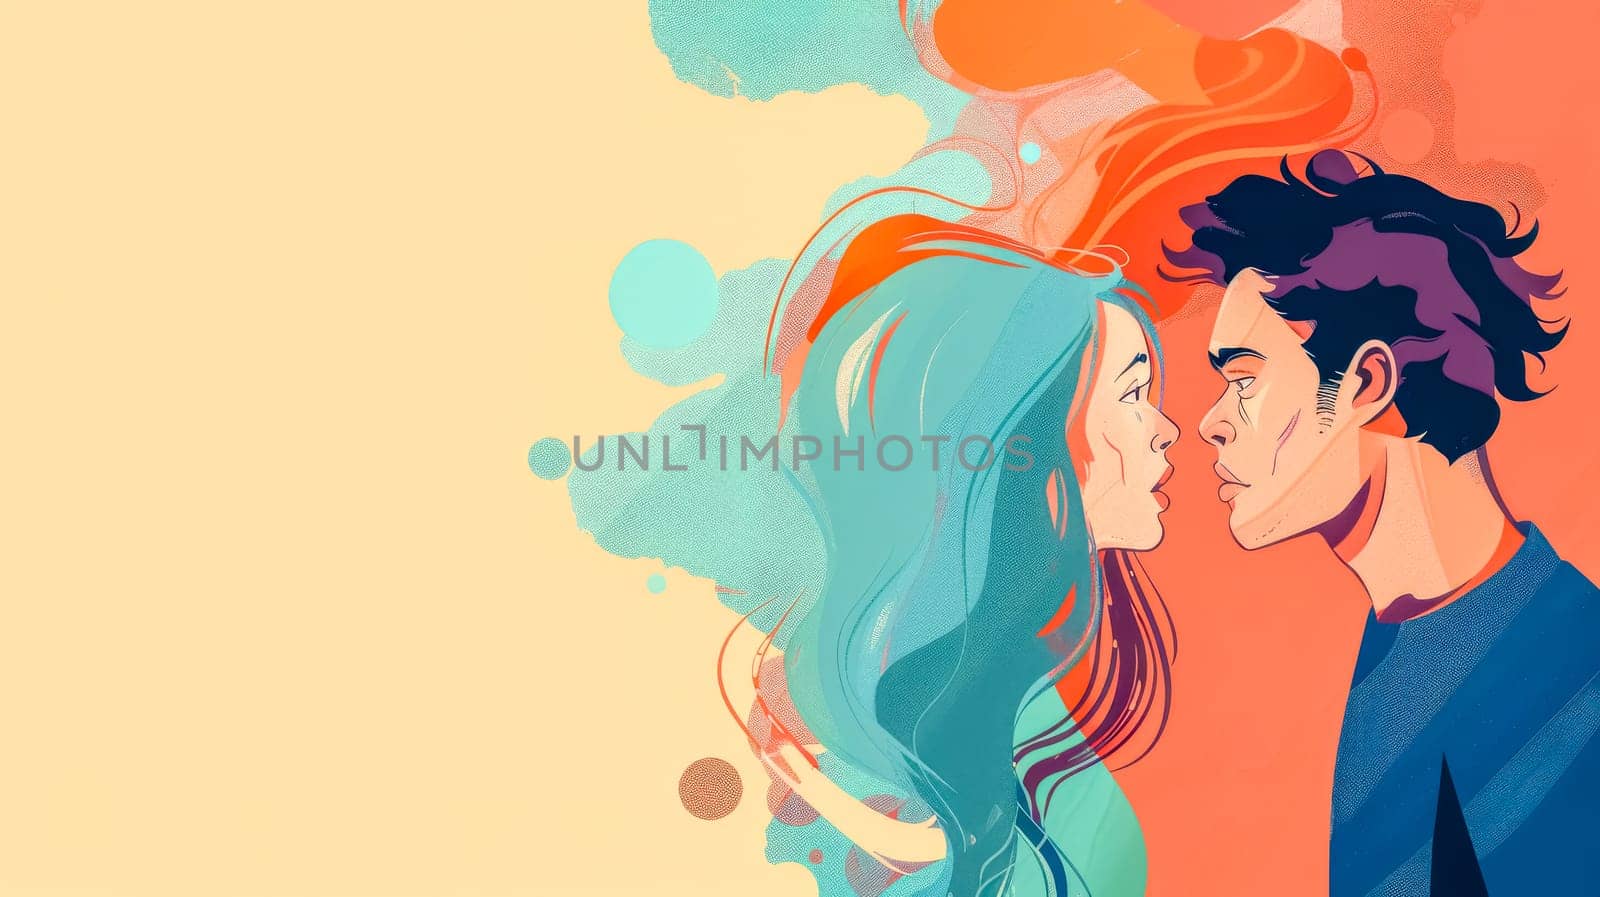 Surreal portrait of love and connection, copy space by Edophoto